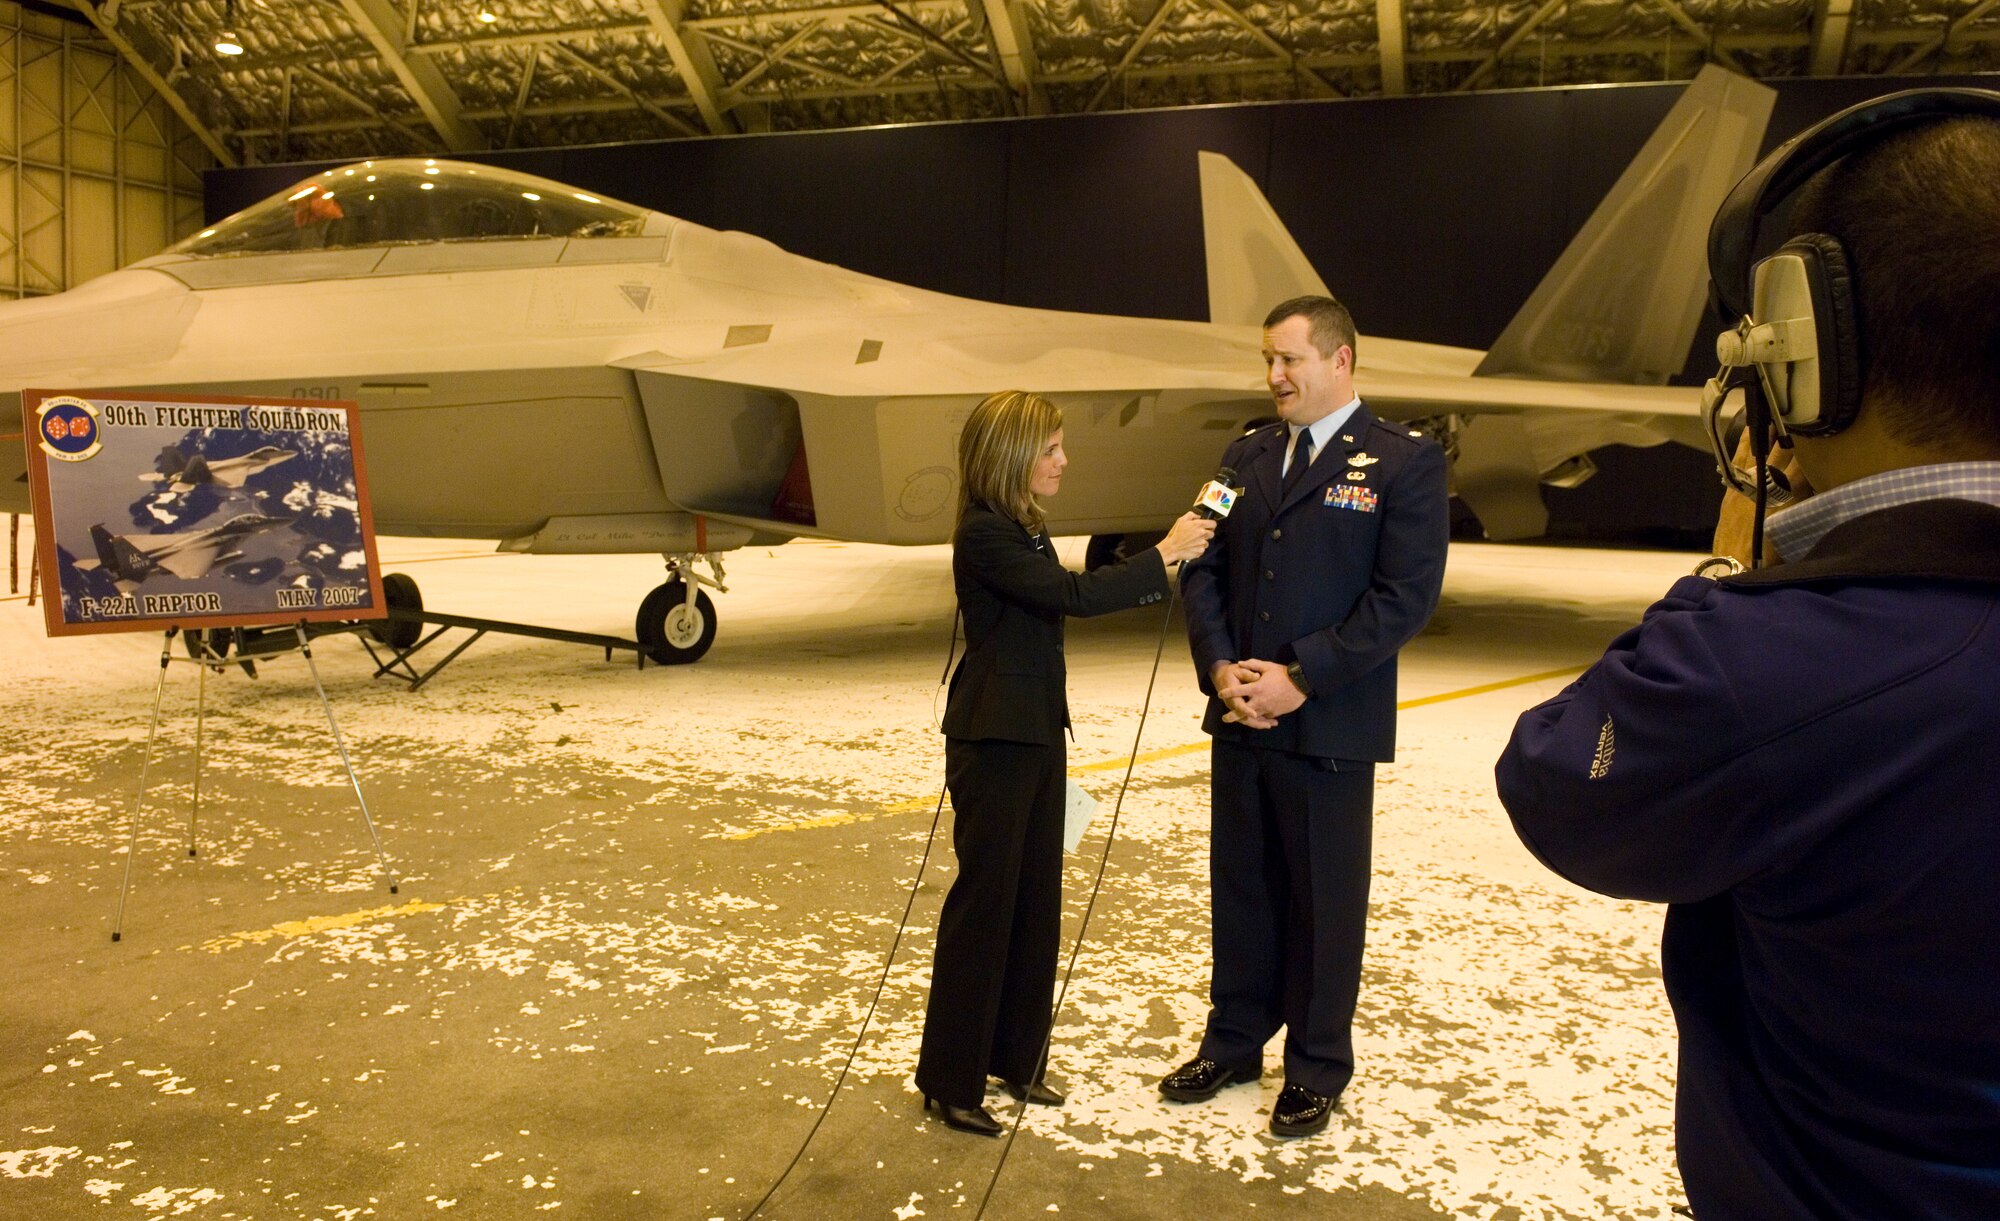 ELMENDORF AIR FORCE BASE, Alaska -- Megan Baldino, a reporter from the NBC affiliate in Anchorage, interviews Lt. Col. Michael Shower after he accepted command of the 90th Fighter Squadron during a ceremony here May 10. The historic change of command the squadron's official conversion from the F-15E Strike Eagle to the F-22A Raptor. The 90th FS is the second operational F-22A Raptor squadron and the first for the Pacific Air Forces Command. The squadron will receive its initial wave of Raptors Aug. 8. (U.S. Air Force photo by Senior Airman Garrett Hothan)